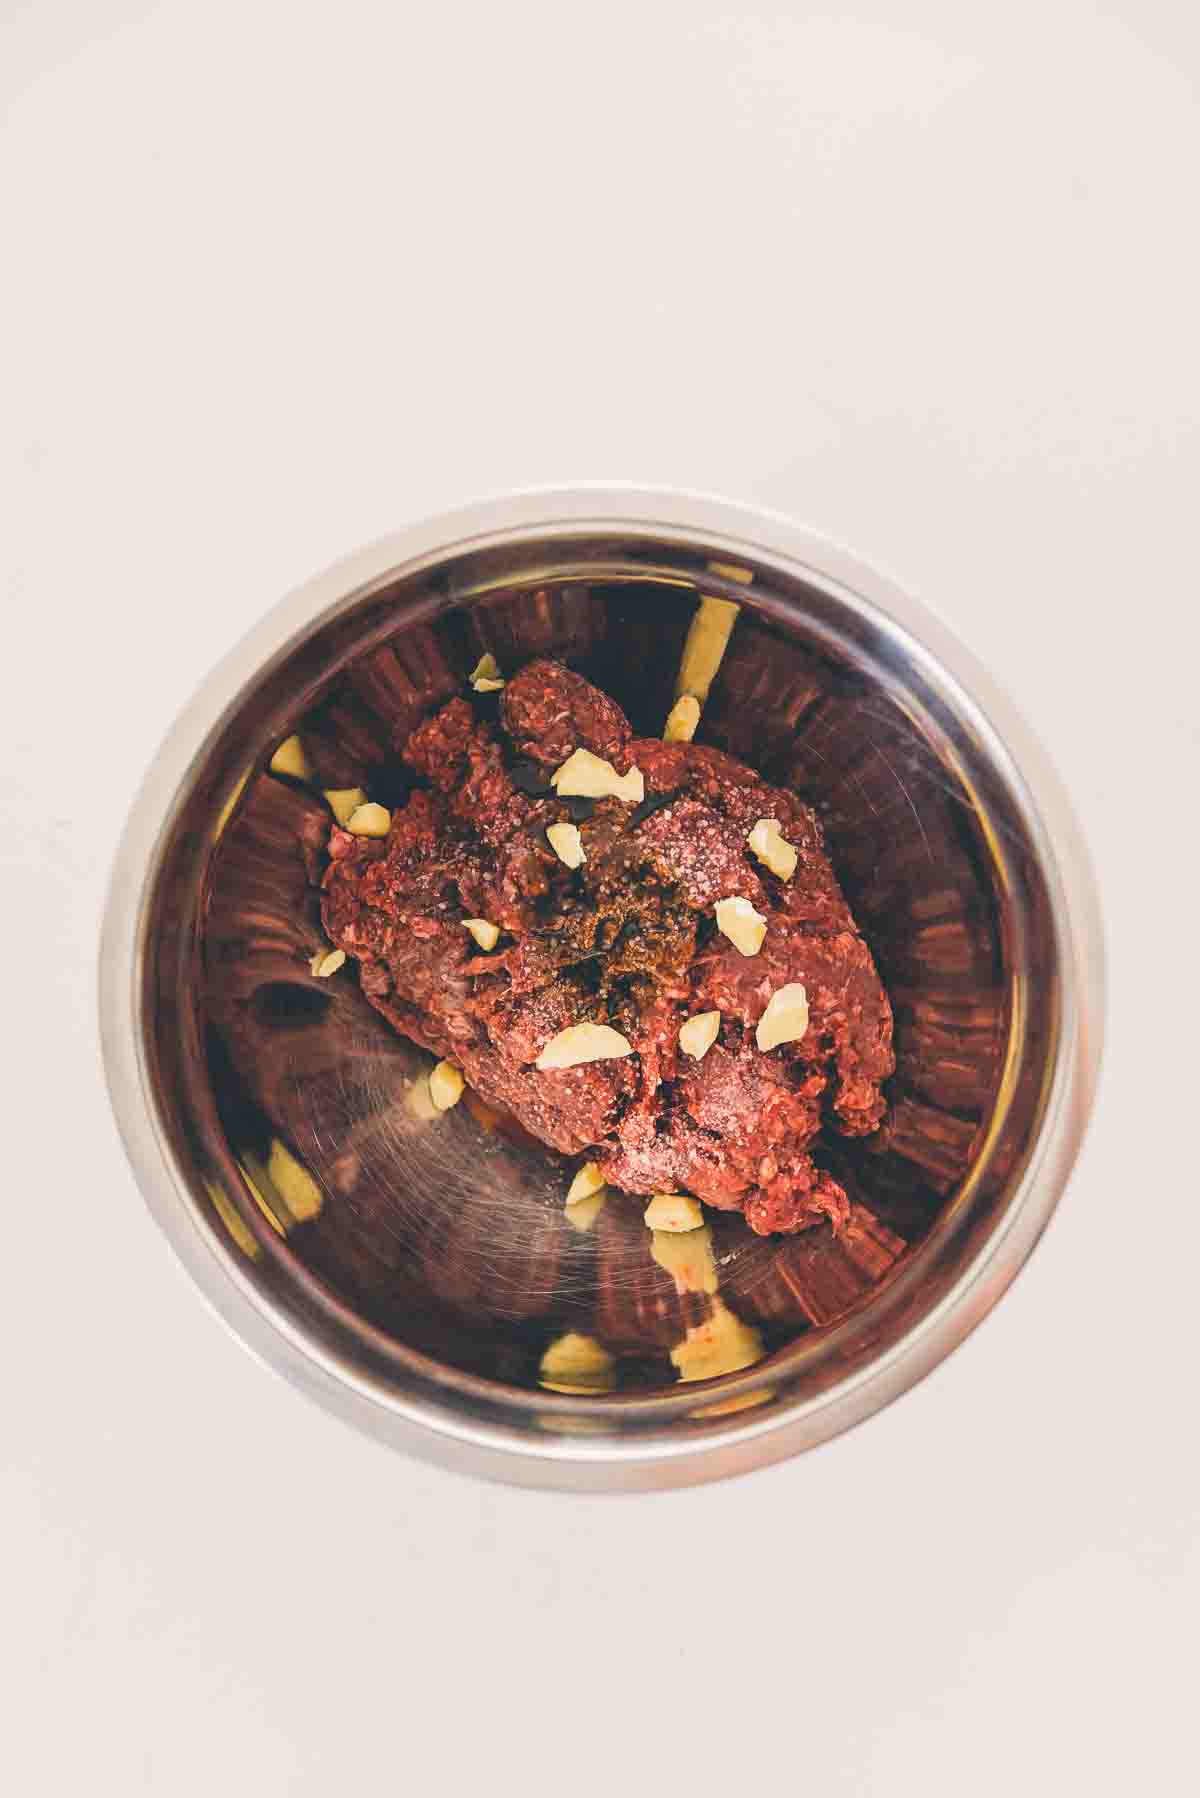 Raw venison meat in a bowl with seasonings and butter.